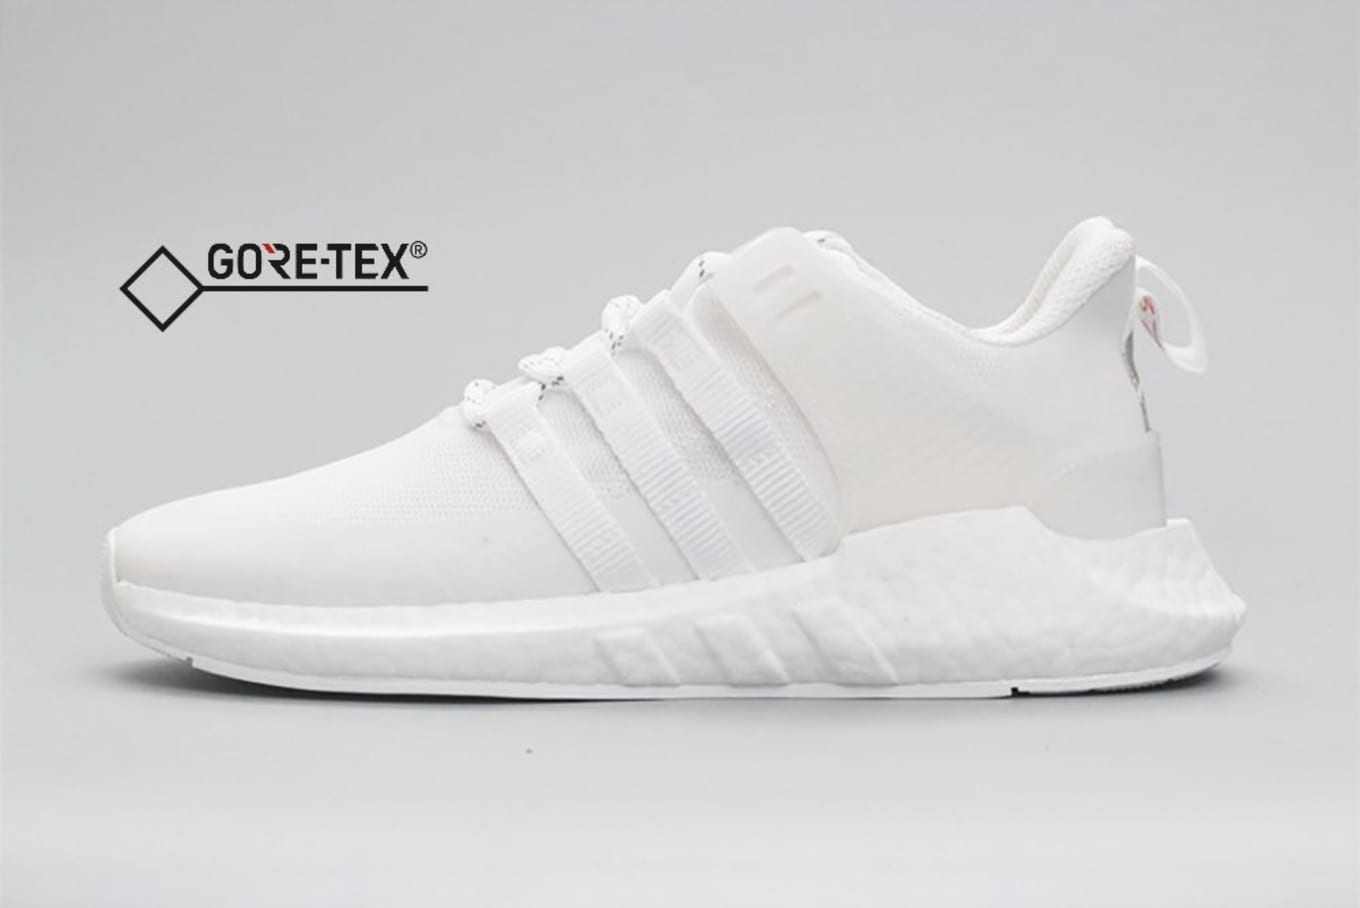 adidas eqt support all white